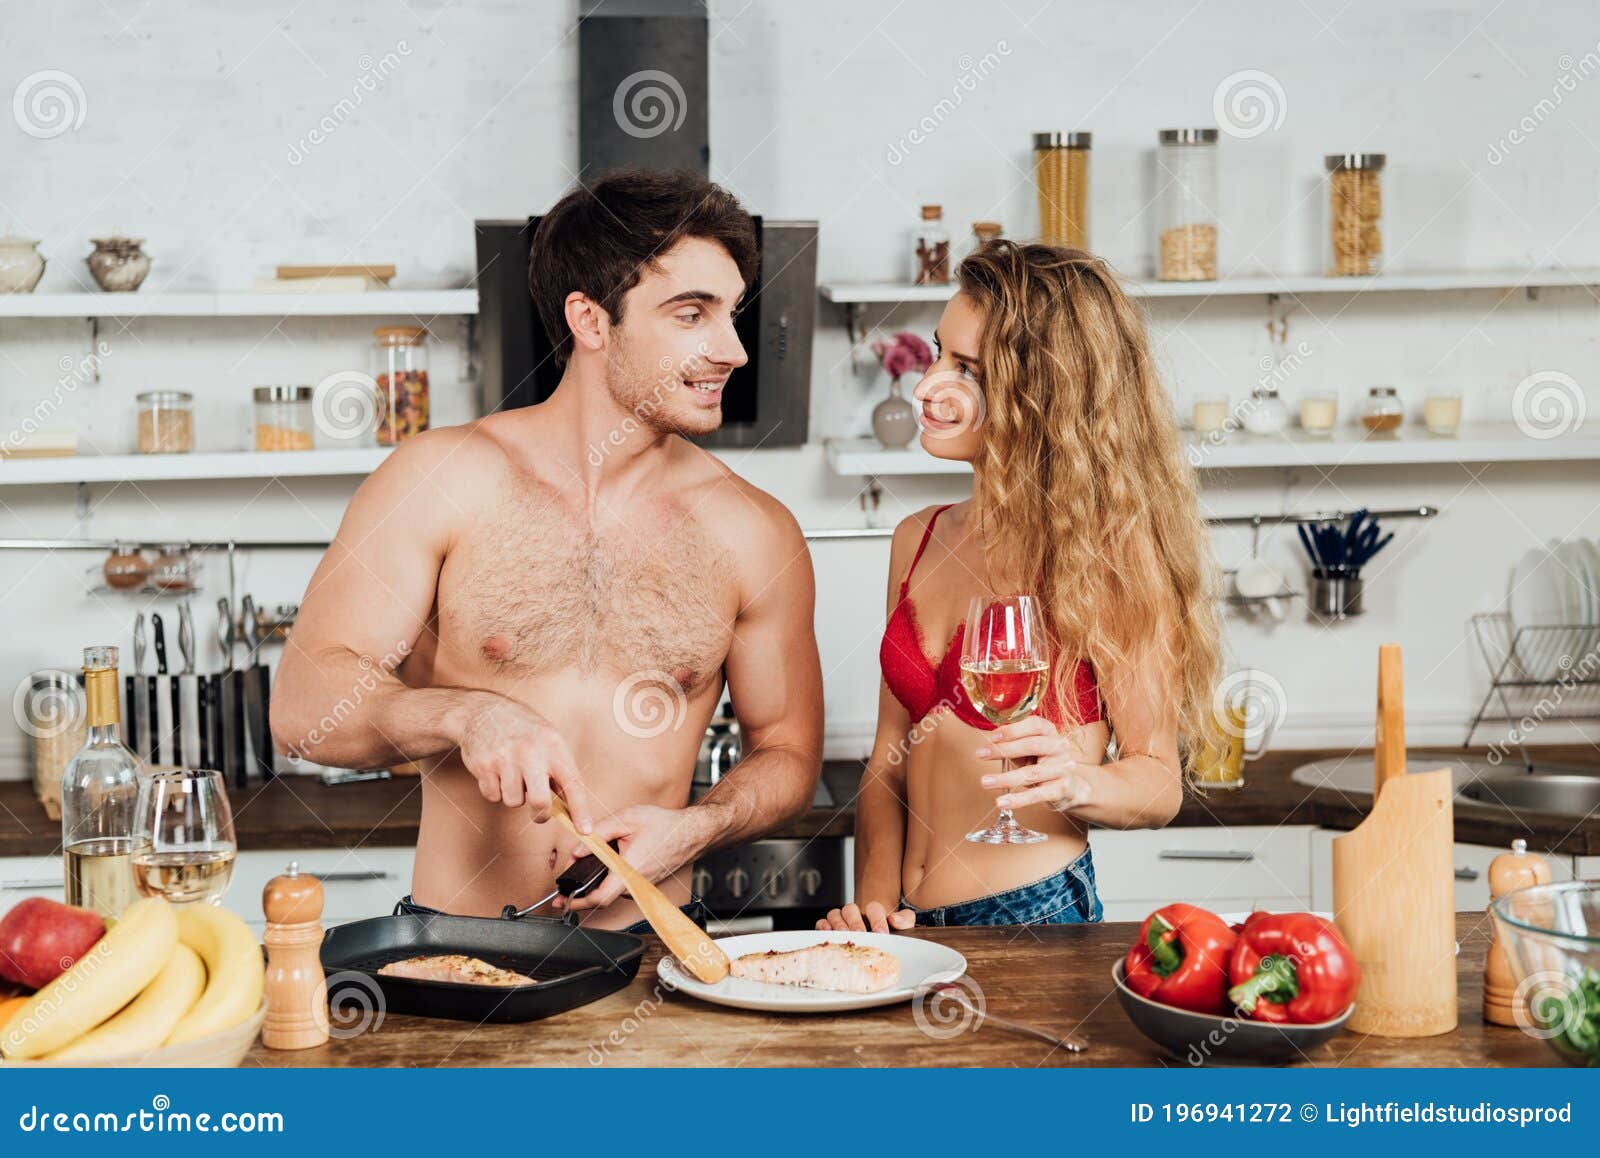 sneaky sex in kitchen